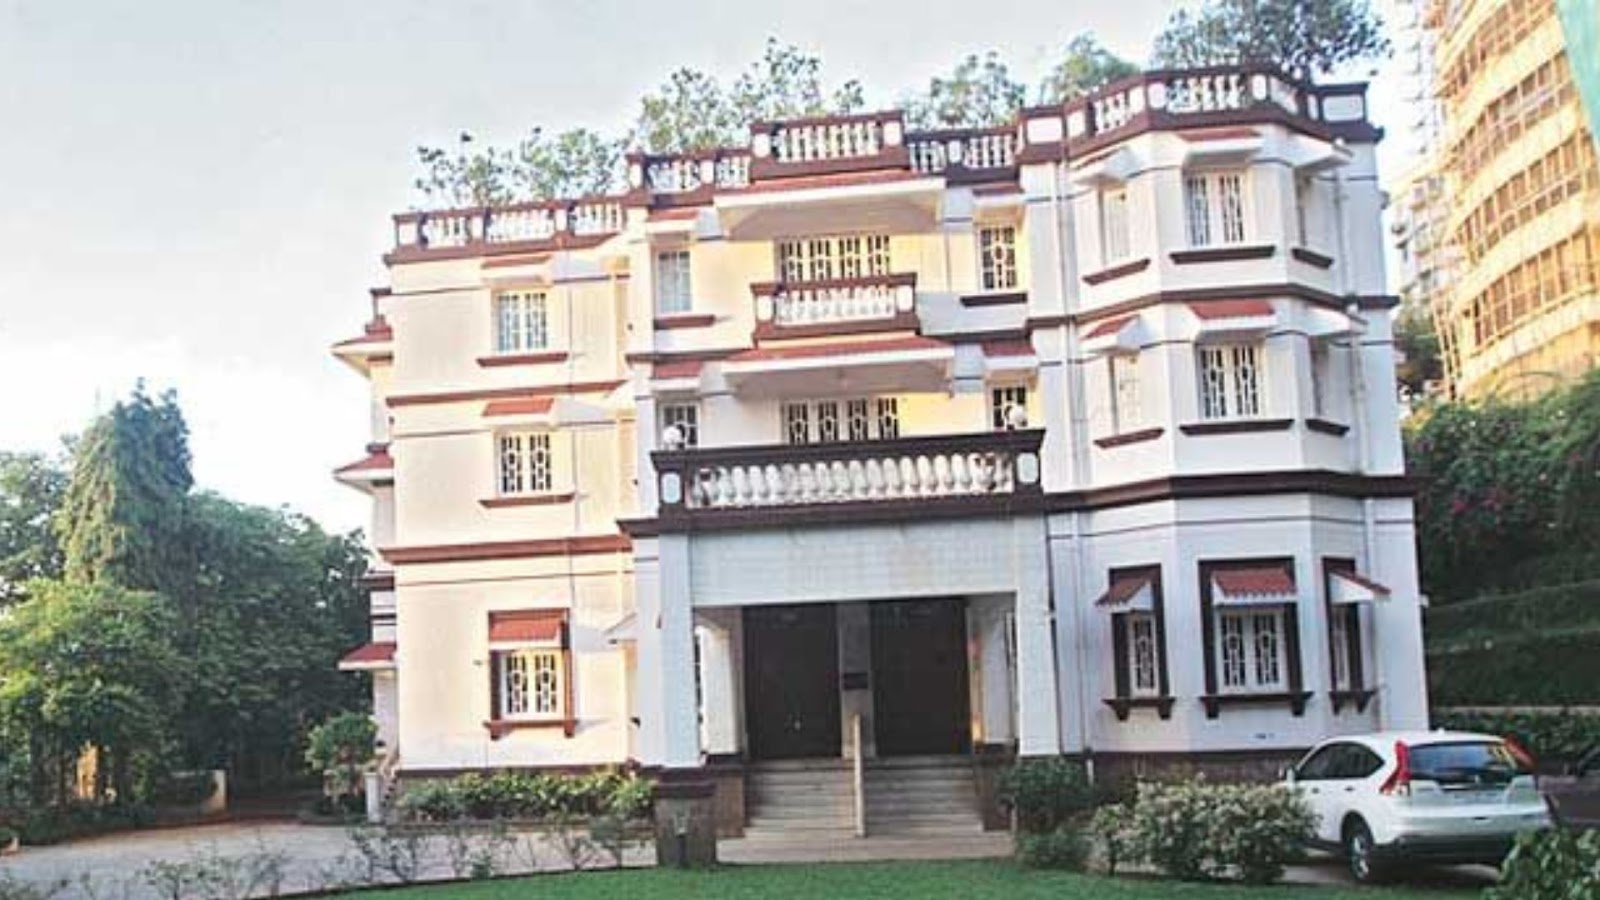 Jatia House: Standing out as one of India's most expensive properties..